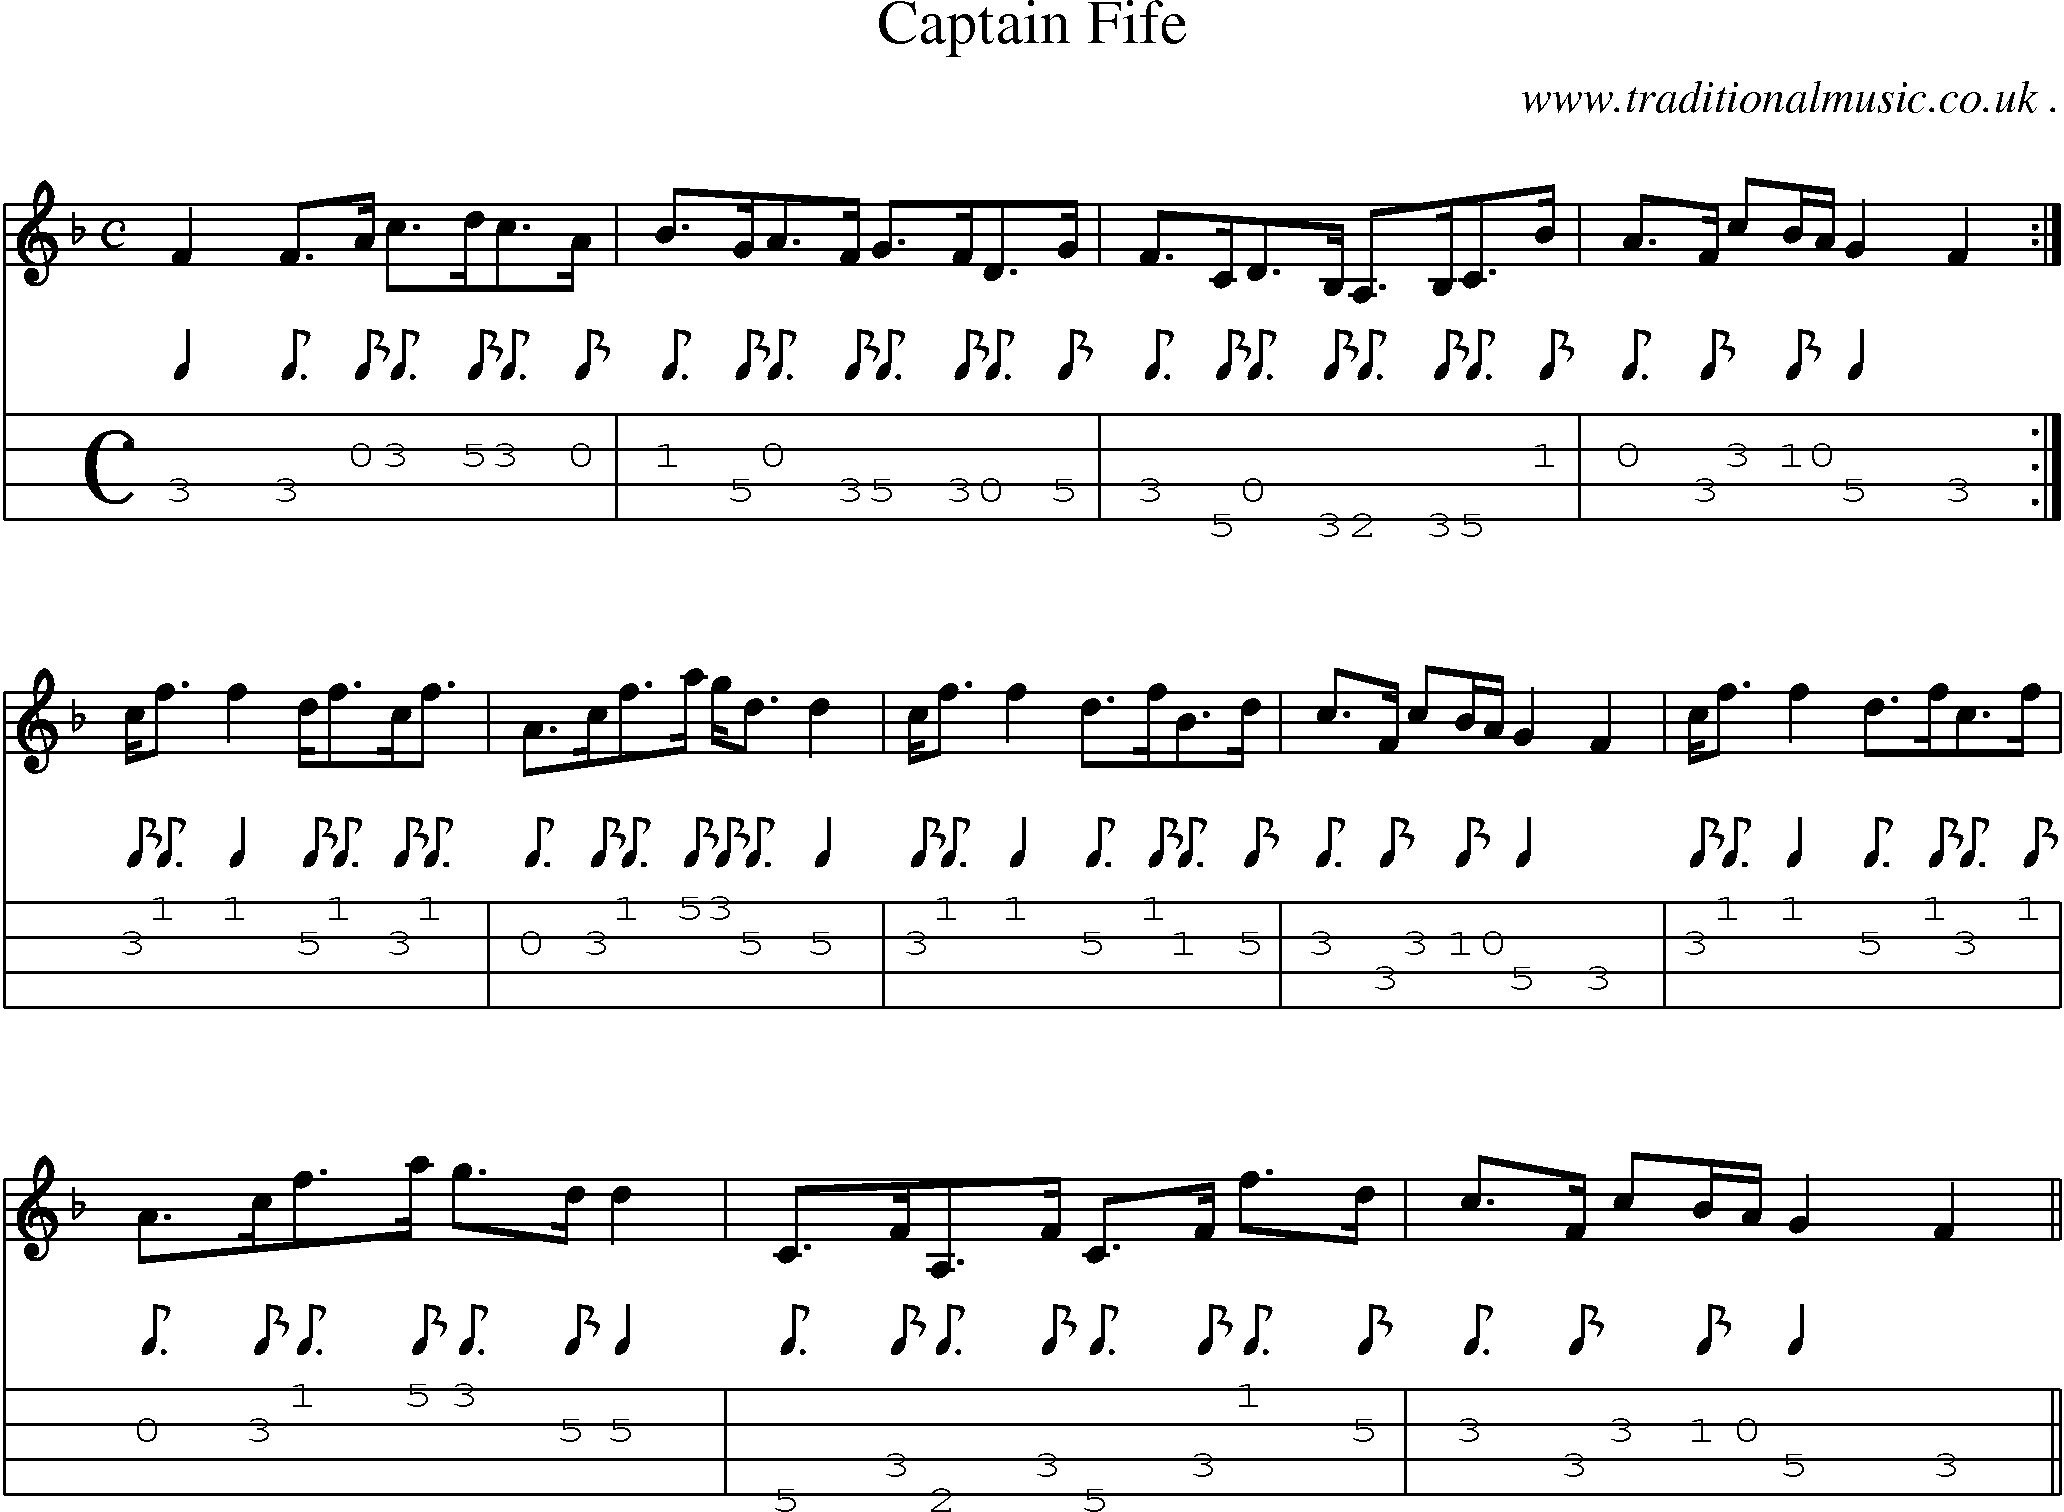 Sheet-music  score, Chords and Mandolin Tabs for Captain Fife